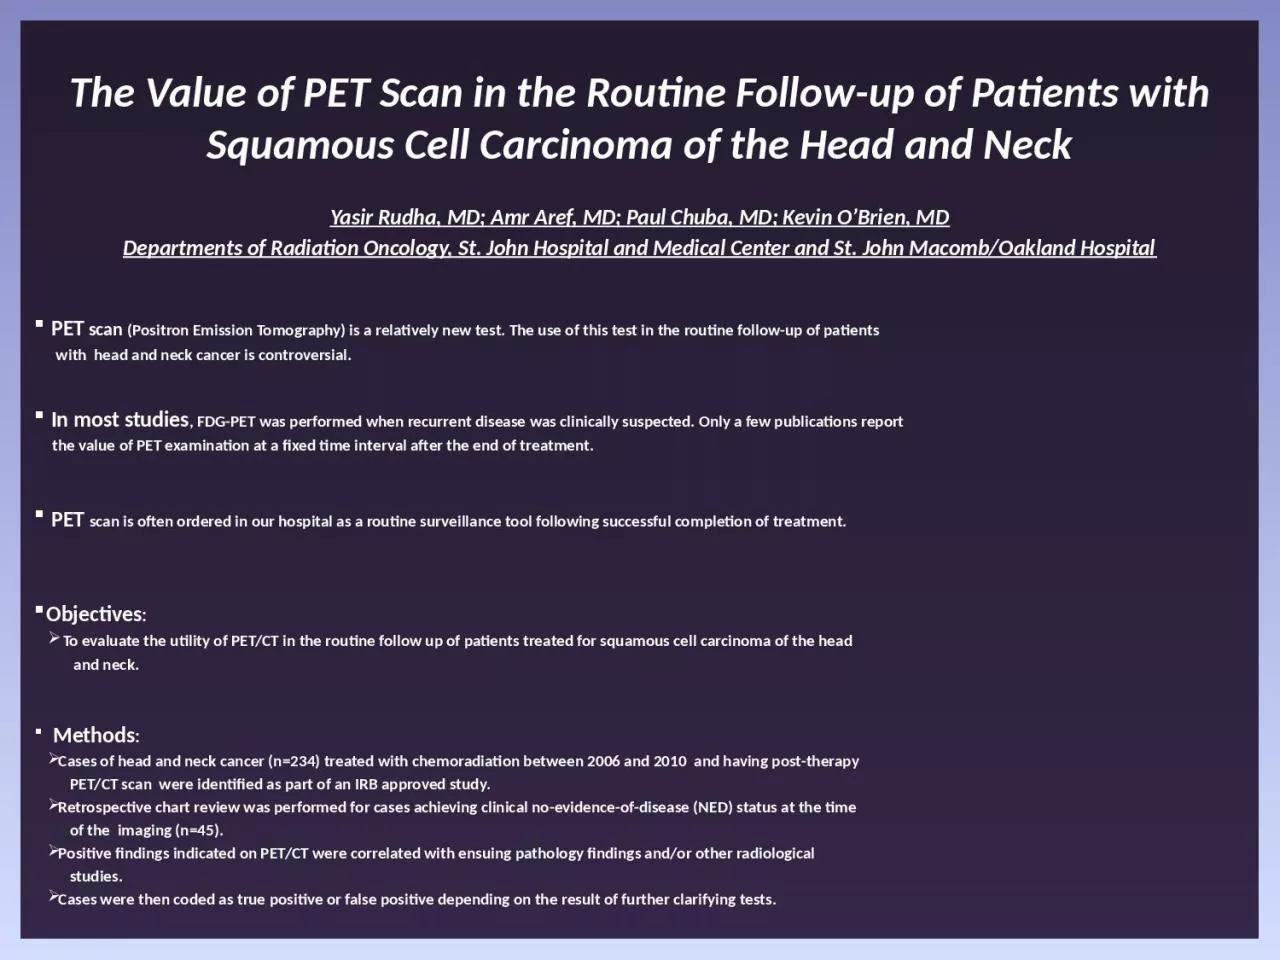 The Value of PET Scan in the Routine Follow-up of Patients with